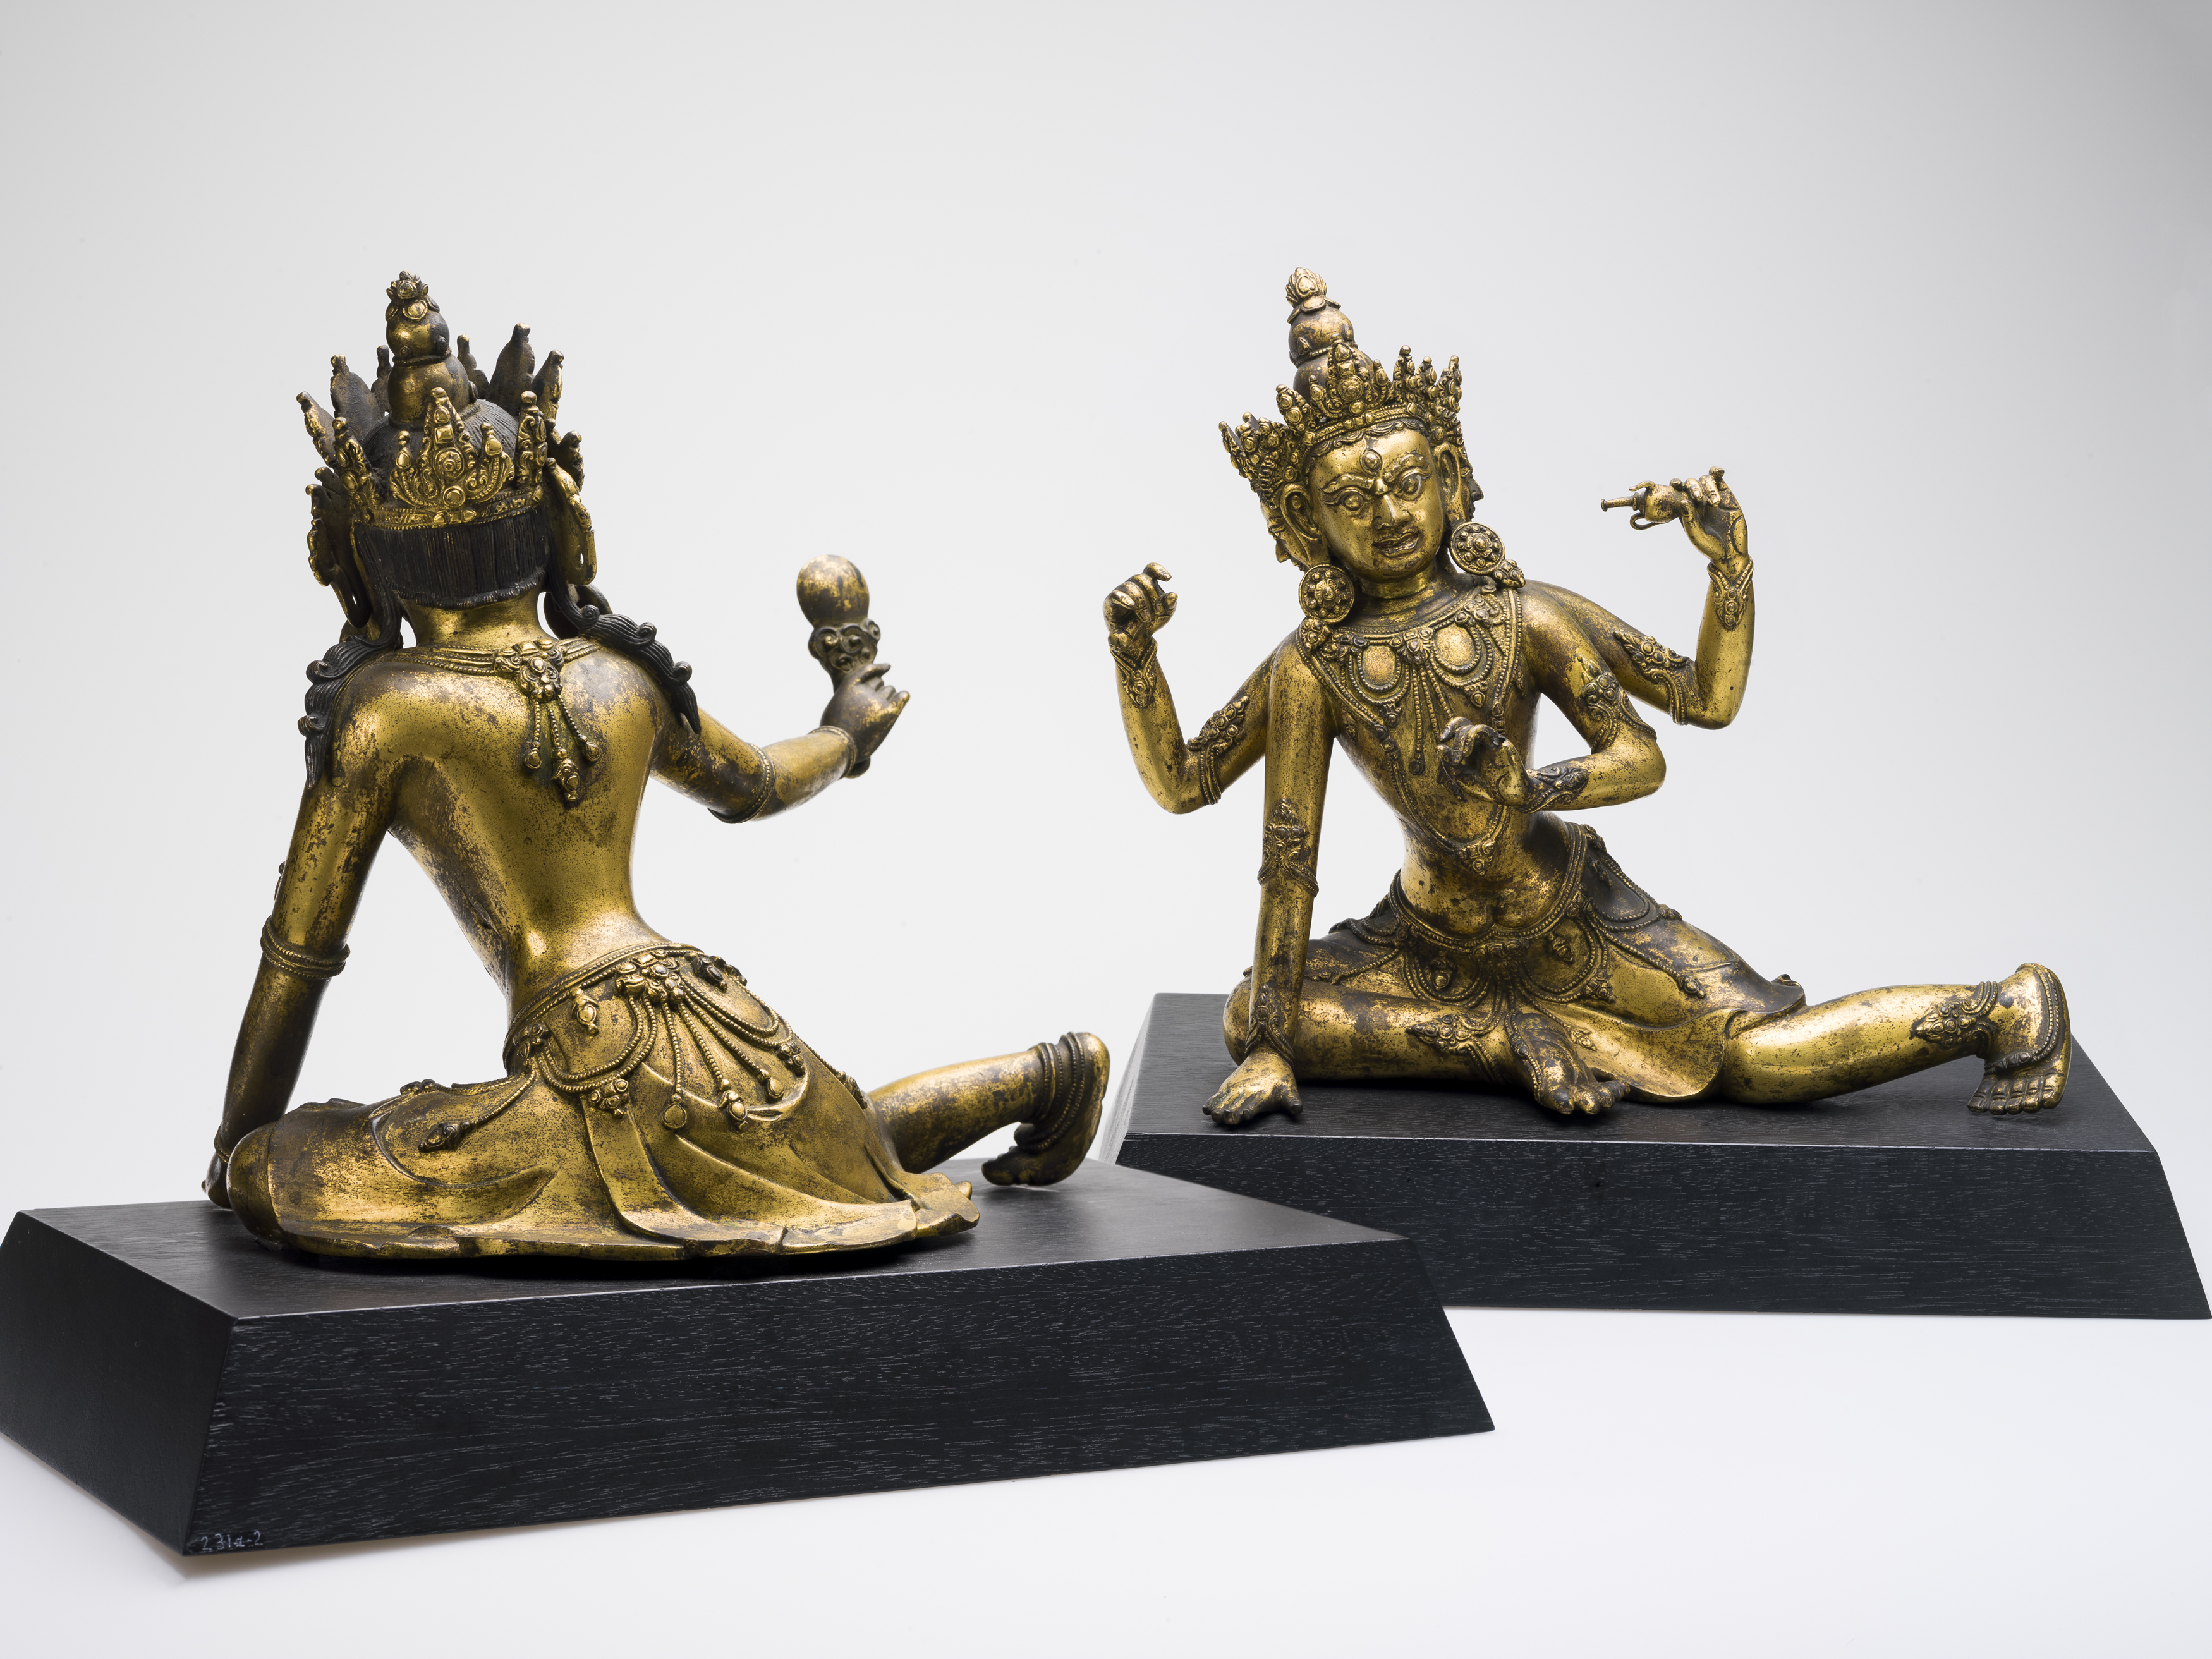 An image of two deity figures looking each other.